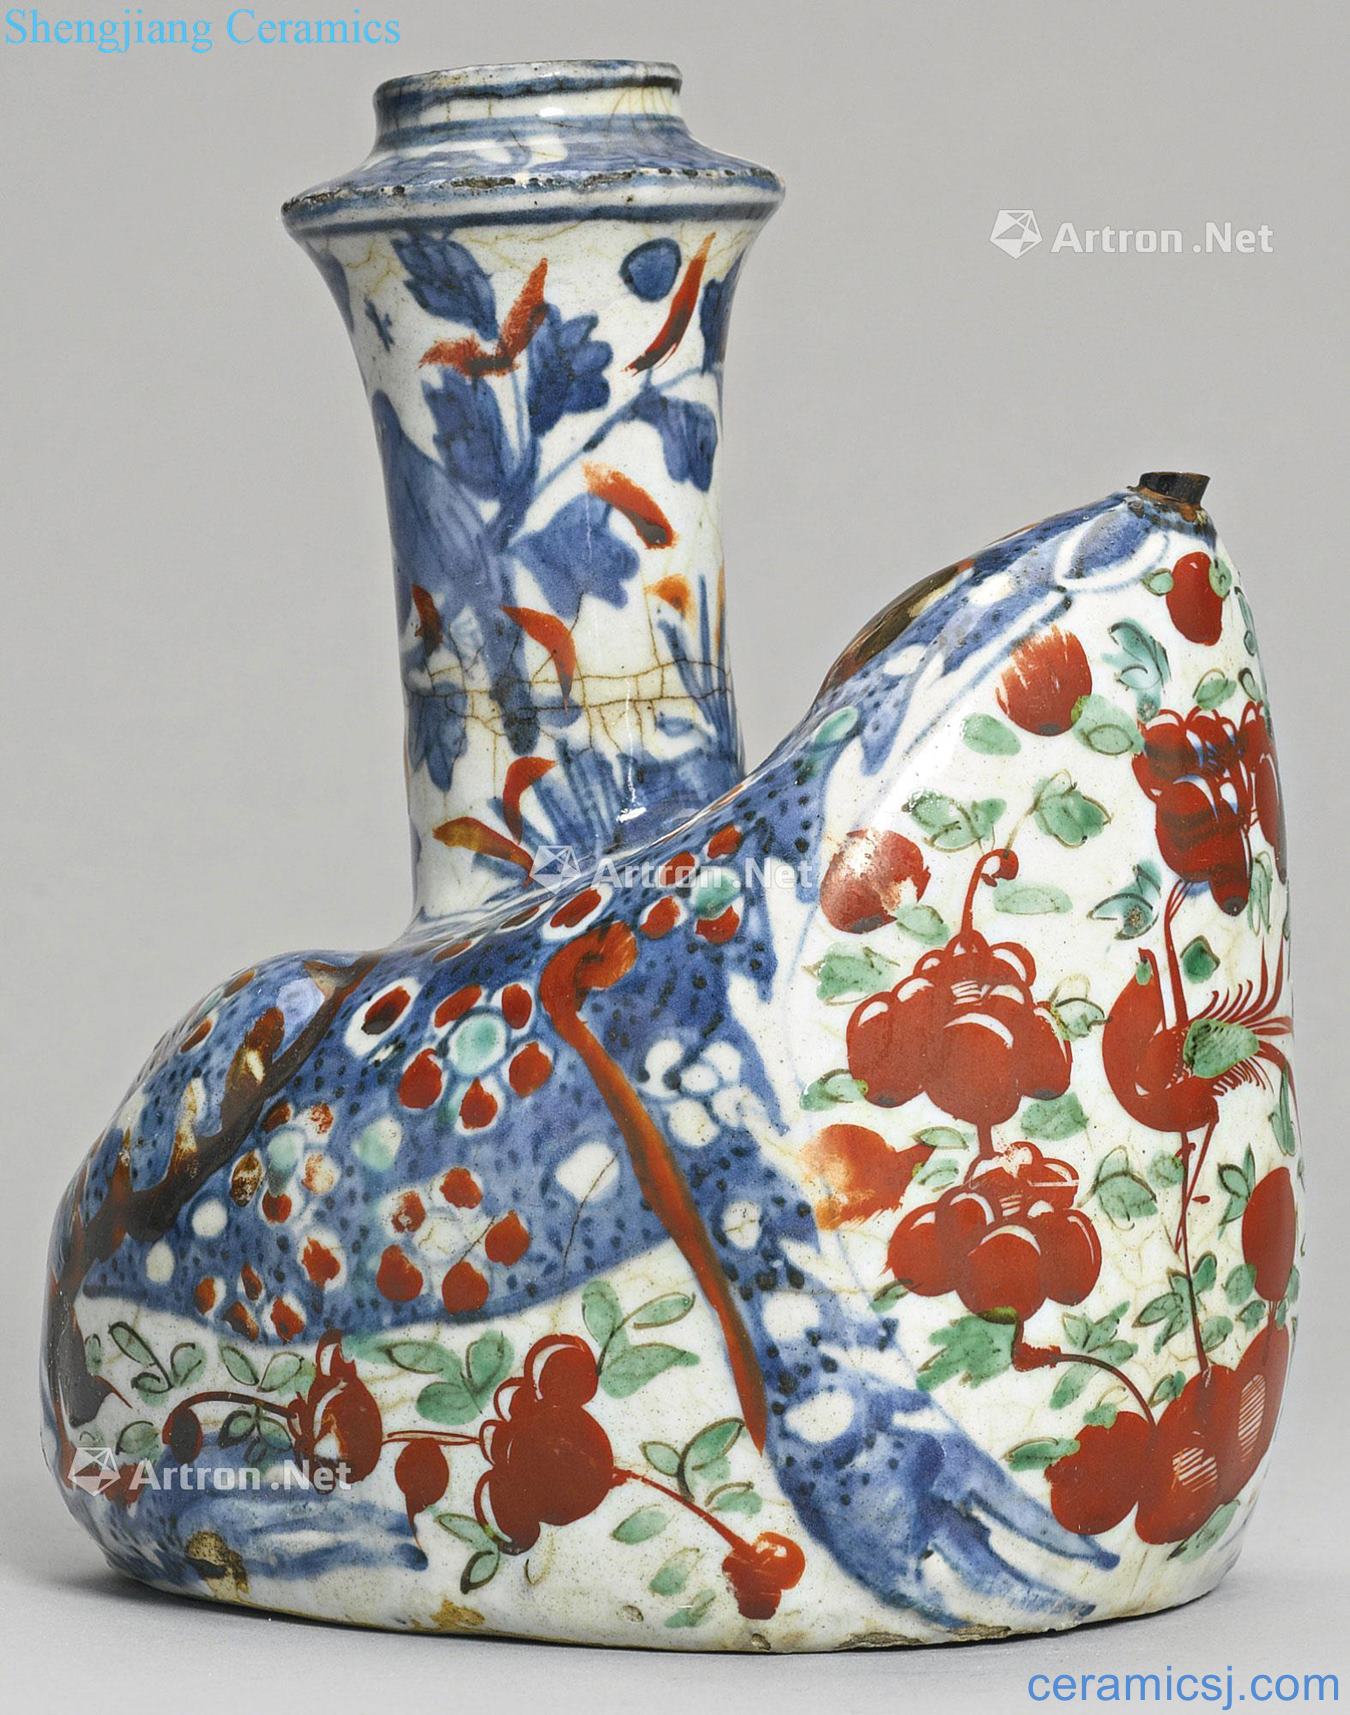 The late sixteenth century Blue and white add flower on grain frog shape after army